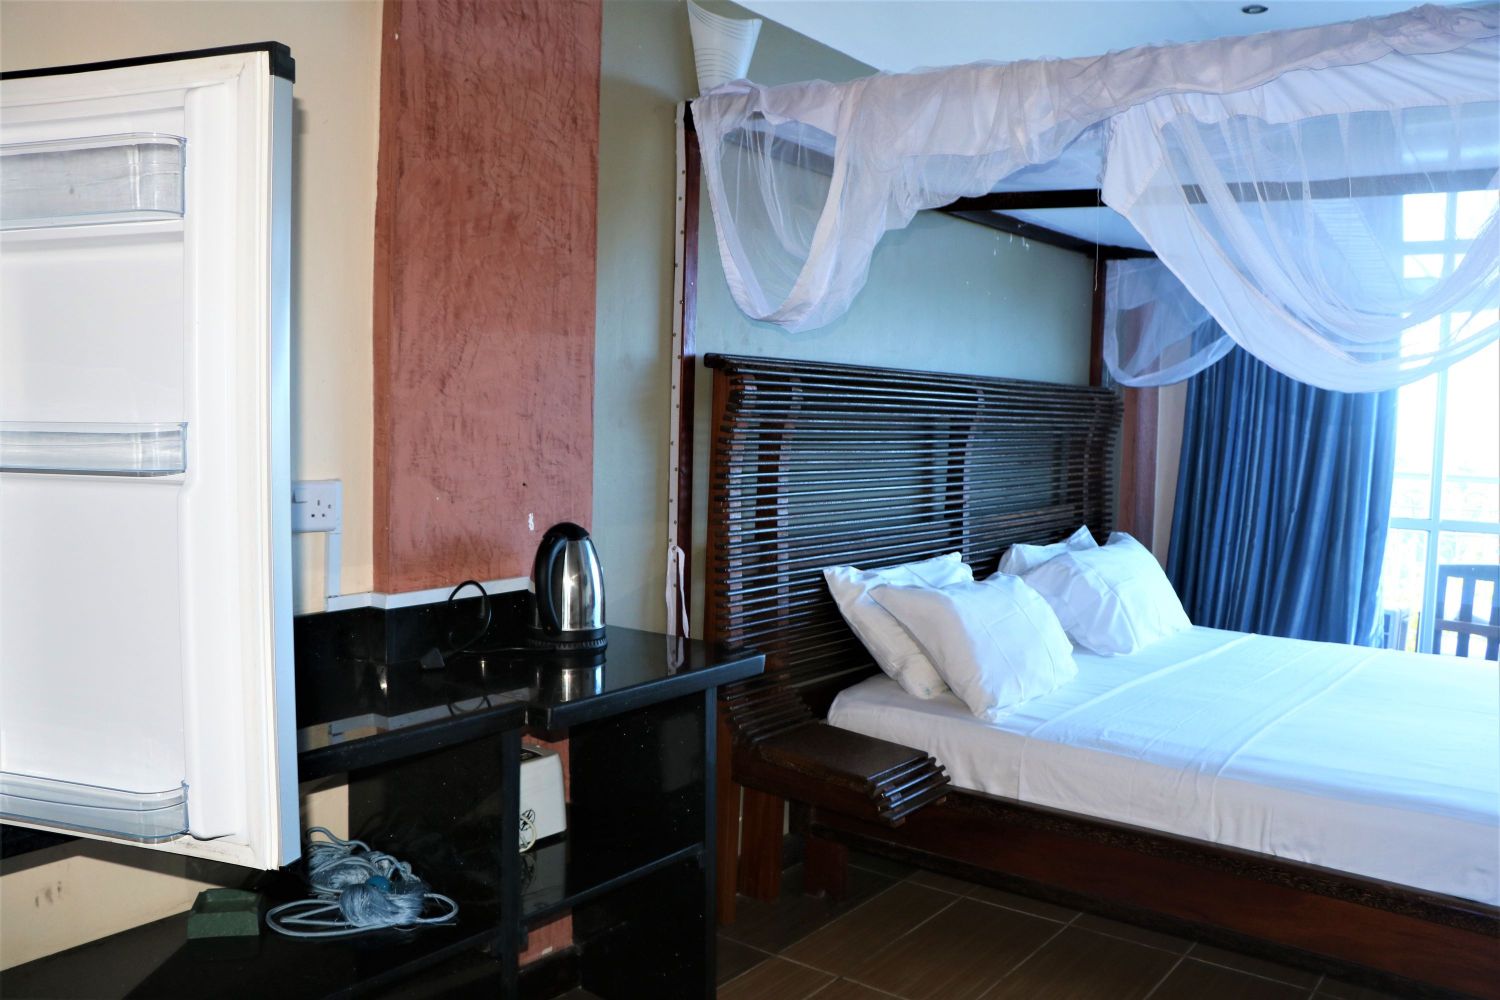 Standard 1 bedroom vacation house in Mombasa. Affordable furnished Hotel for vacation in Mombasa | Zuru Life Africa